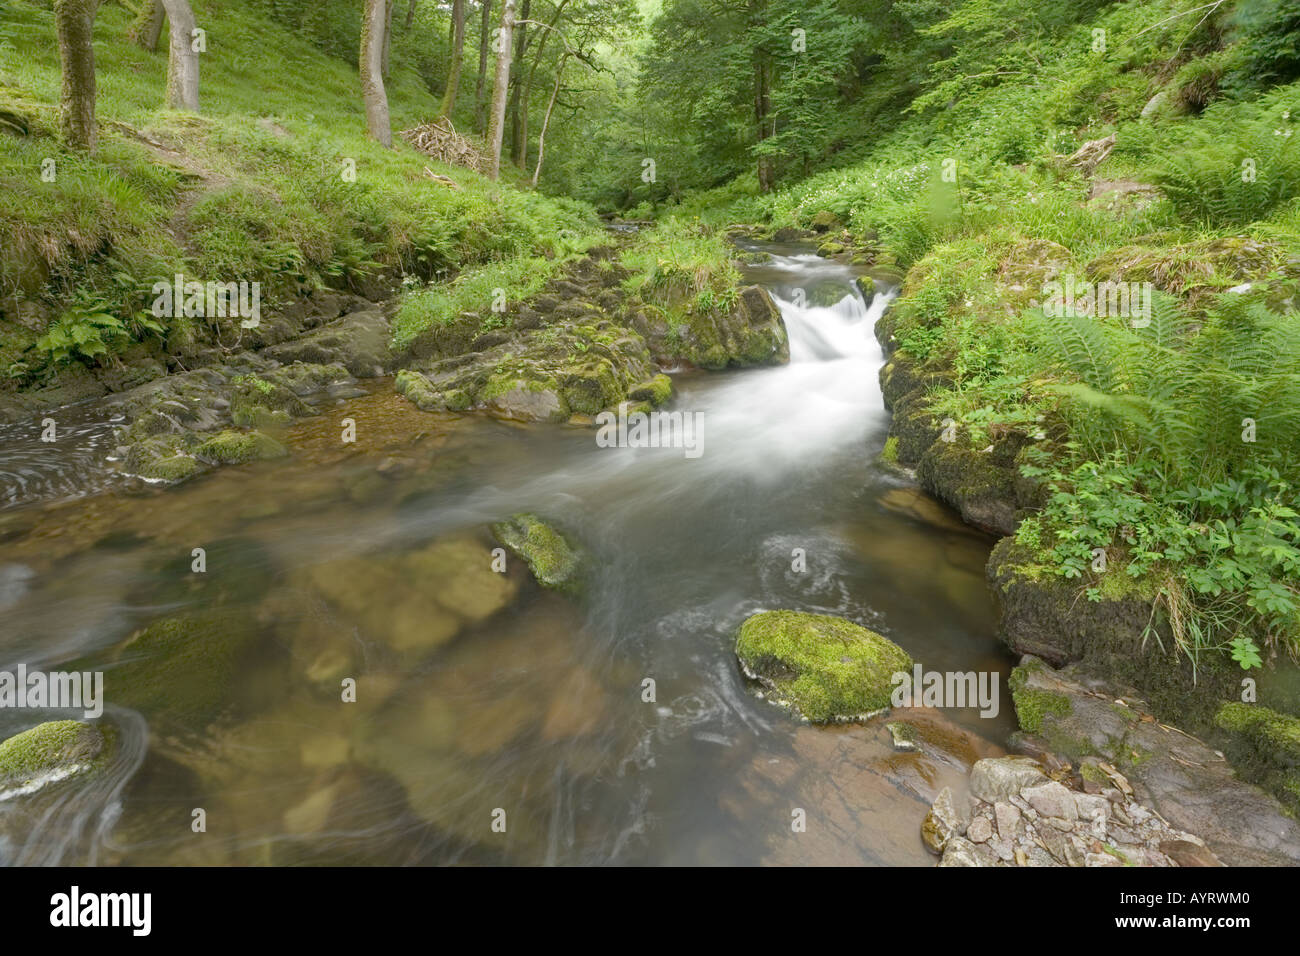 The waterfall on the East Lyn River just before it flows into Hoar Oak Water at Watersmeet near Lynmouth, Exmoor, Devon Stock Photo